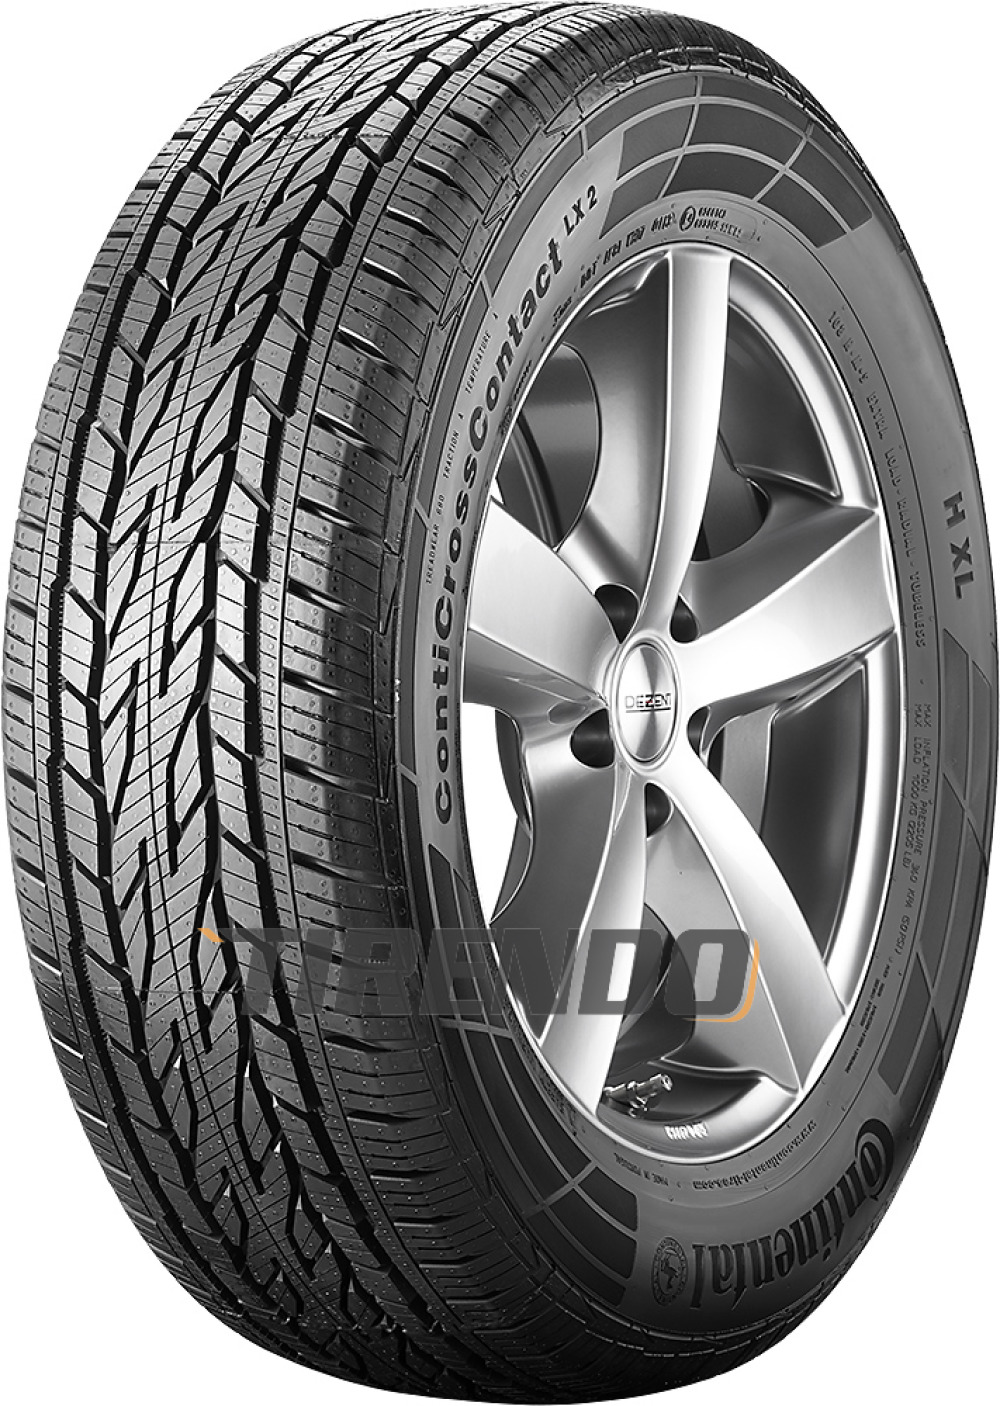 Image of Continental ContiCrossContact LX 2 ( 245/70 R16 111T XL EVc )